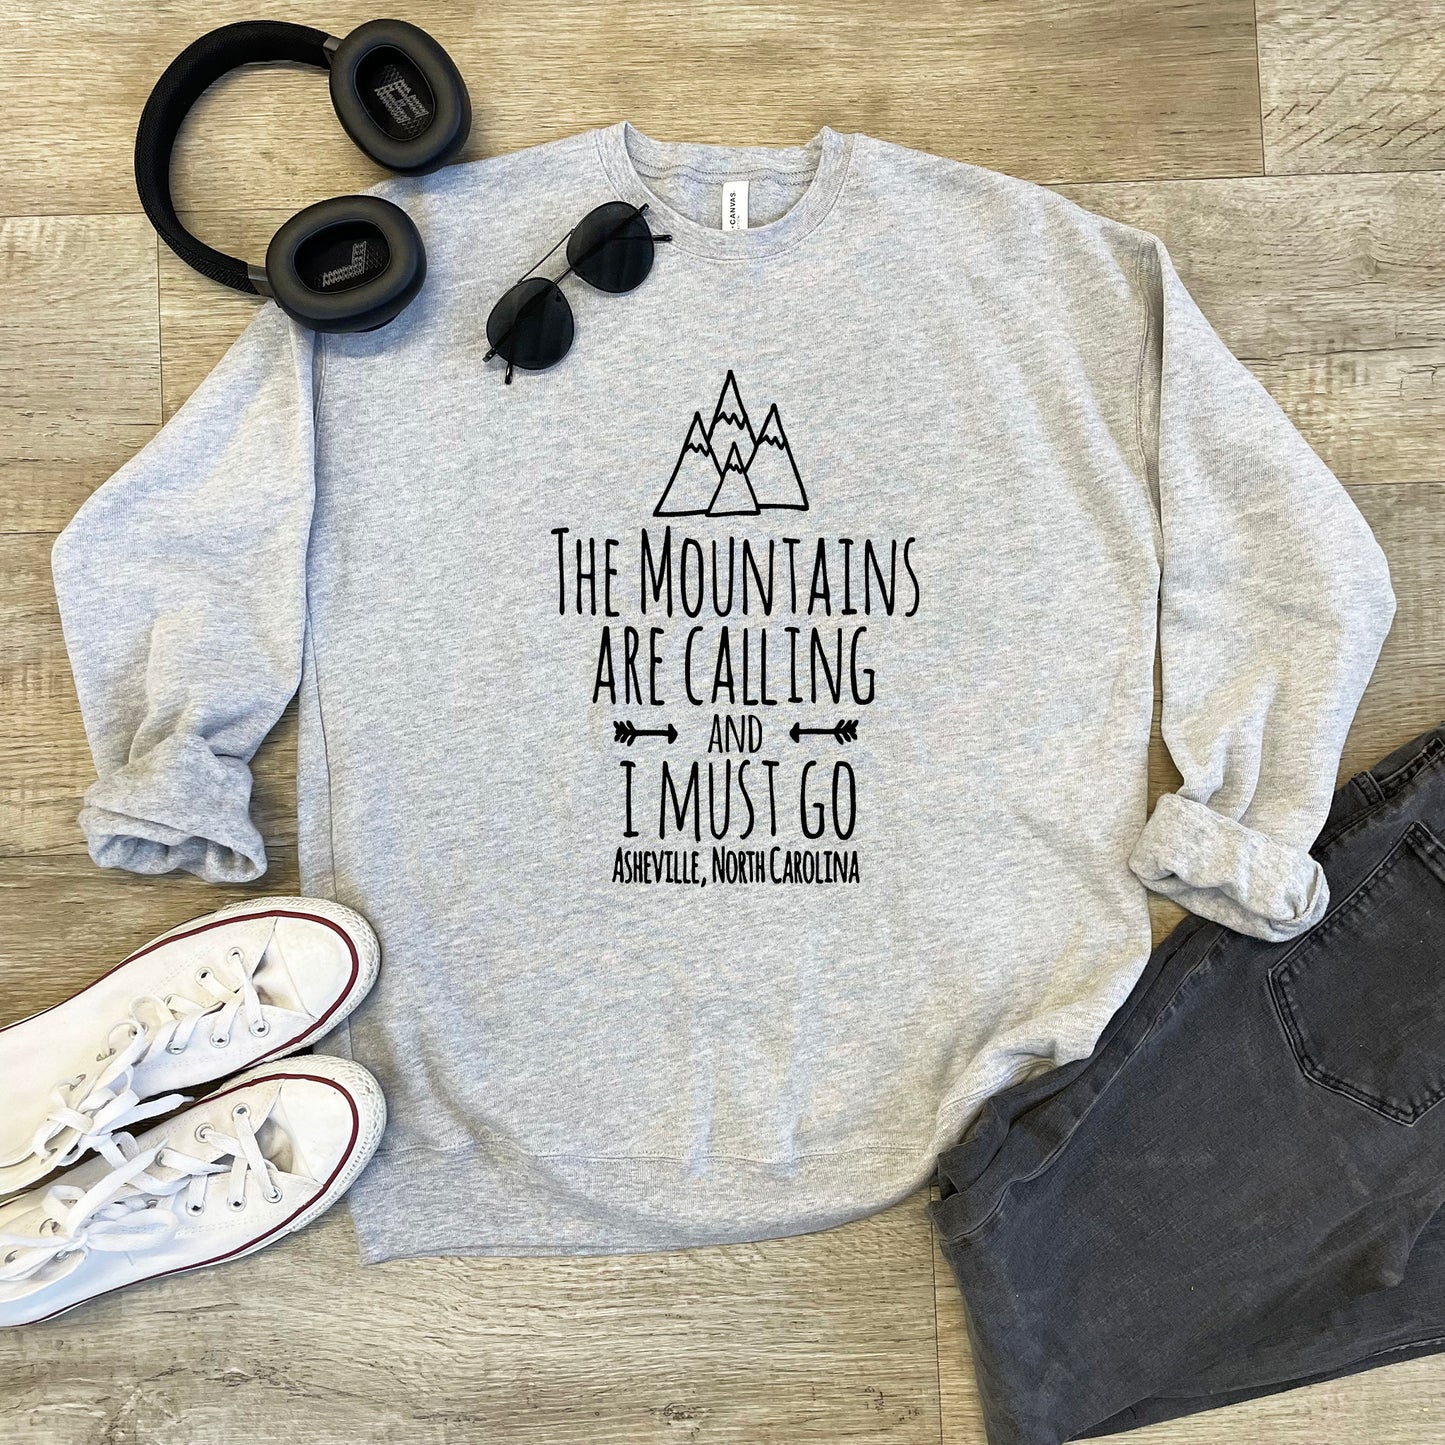 The Mountains Are Calling And I Must Go, Asheville North Carolina - Unisex Sweatshirt - Heather Gray or Dusty Blue